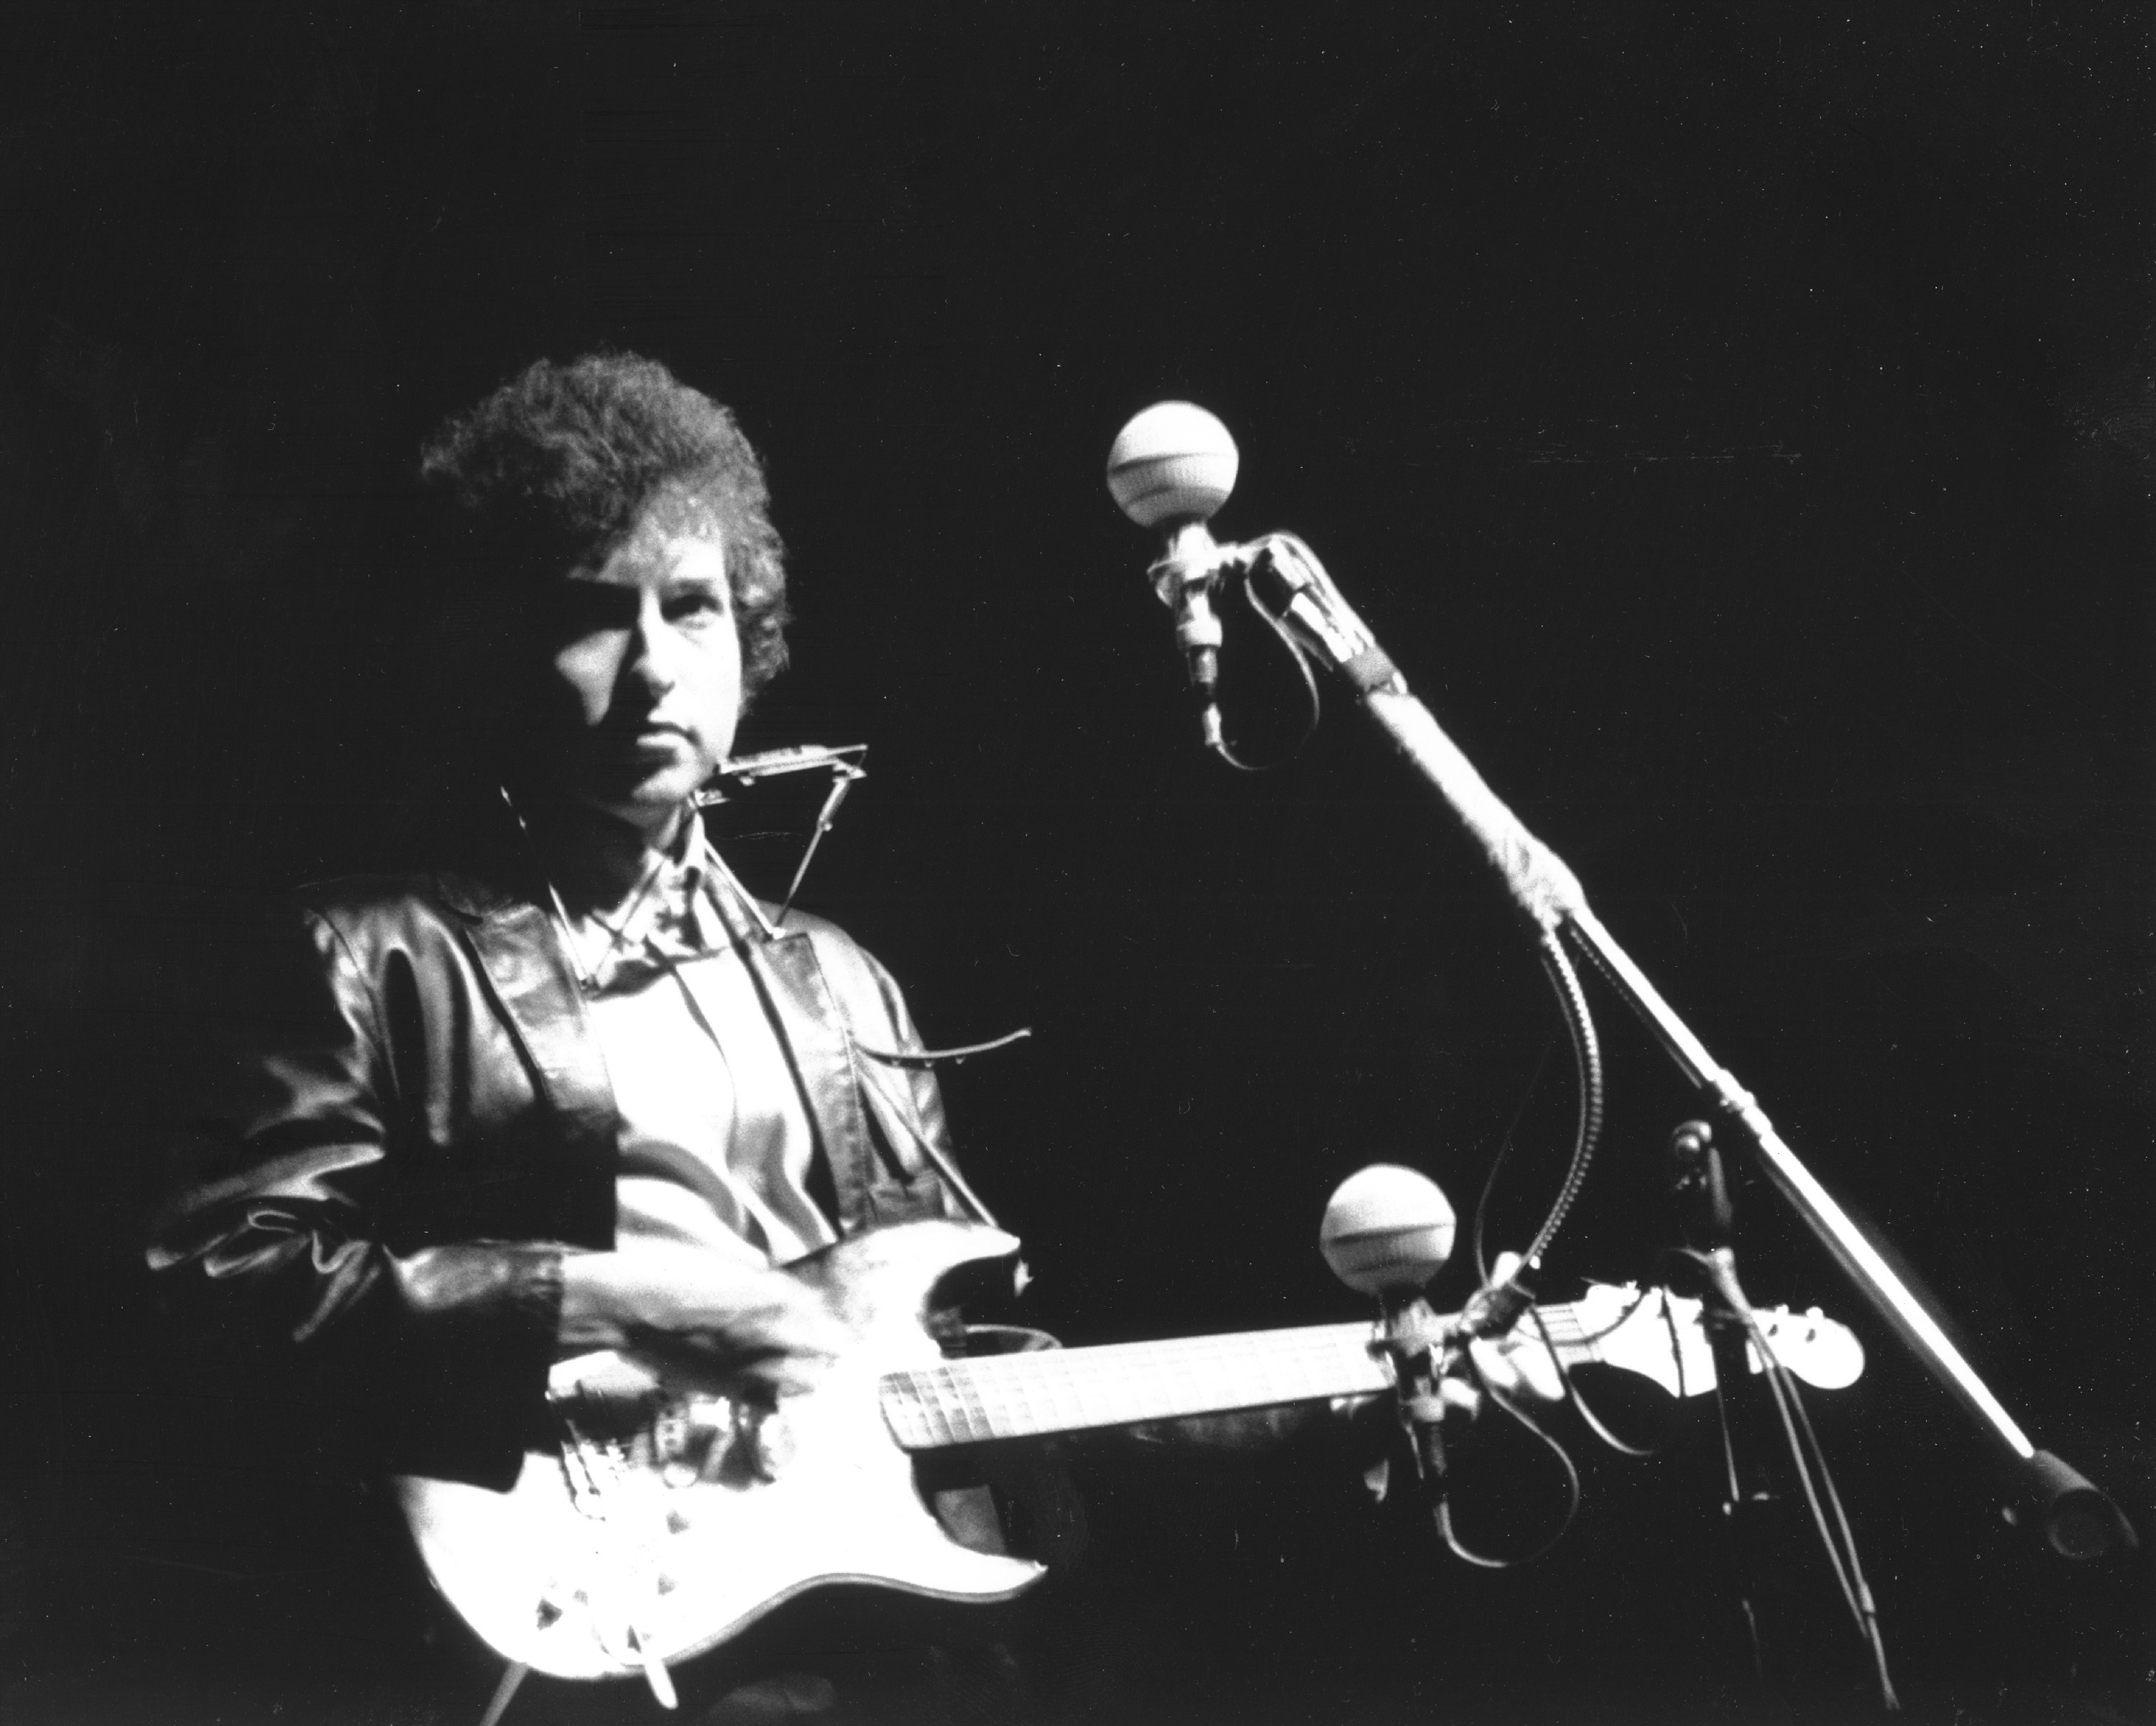 A black and white picture of Bob Dylan holding an electric guitar at the Newport Folk Festival.